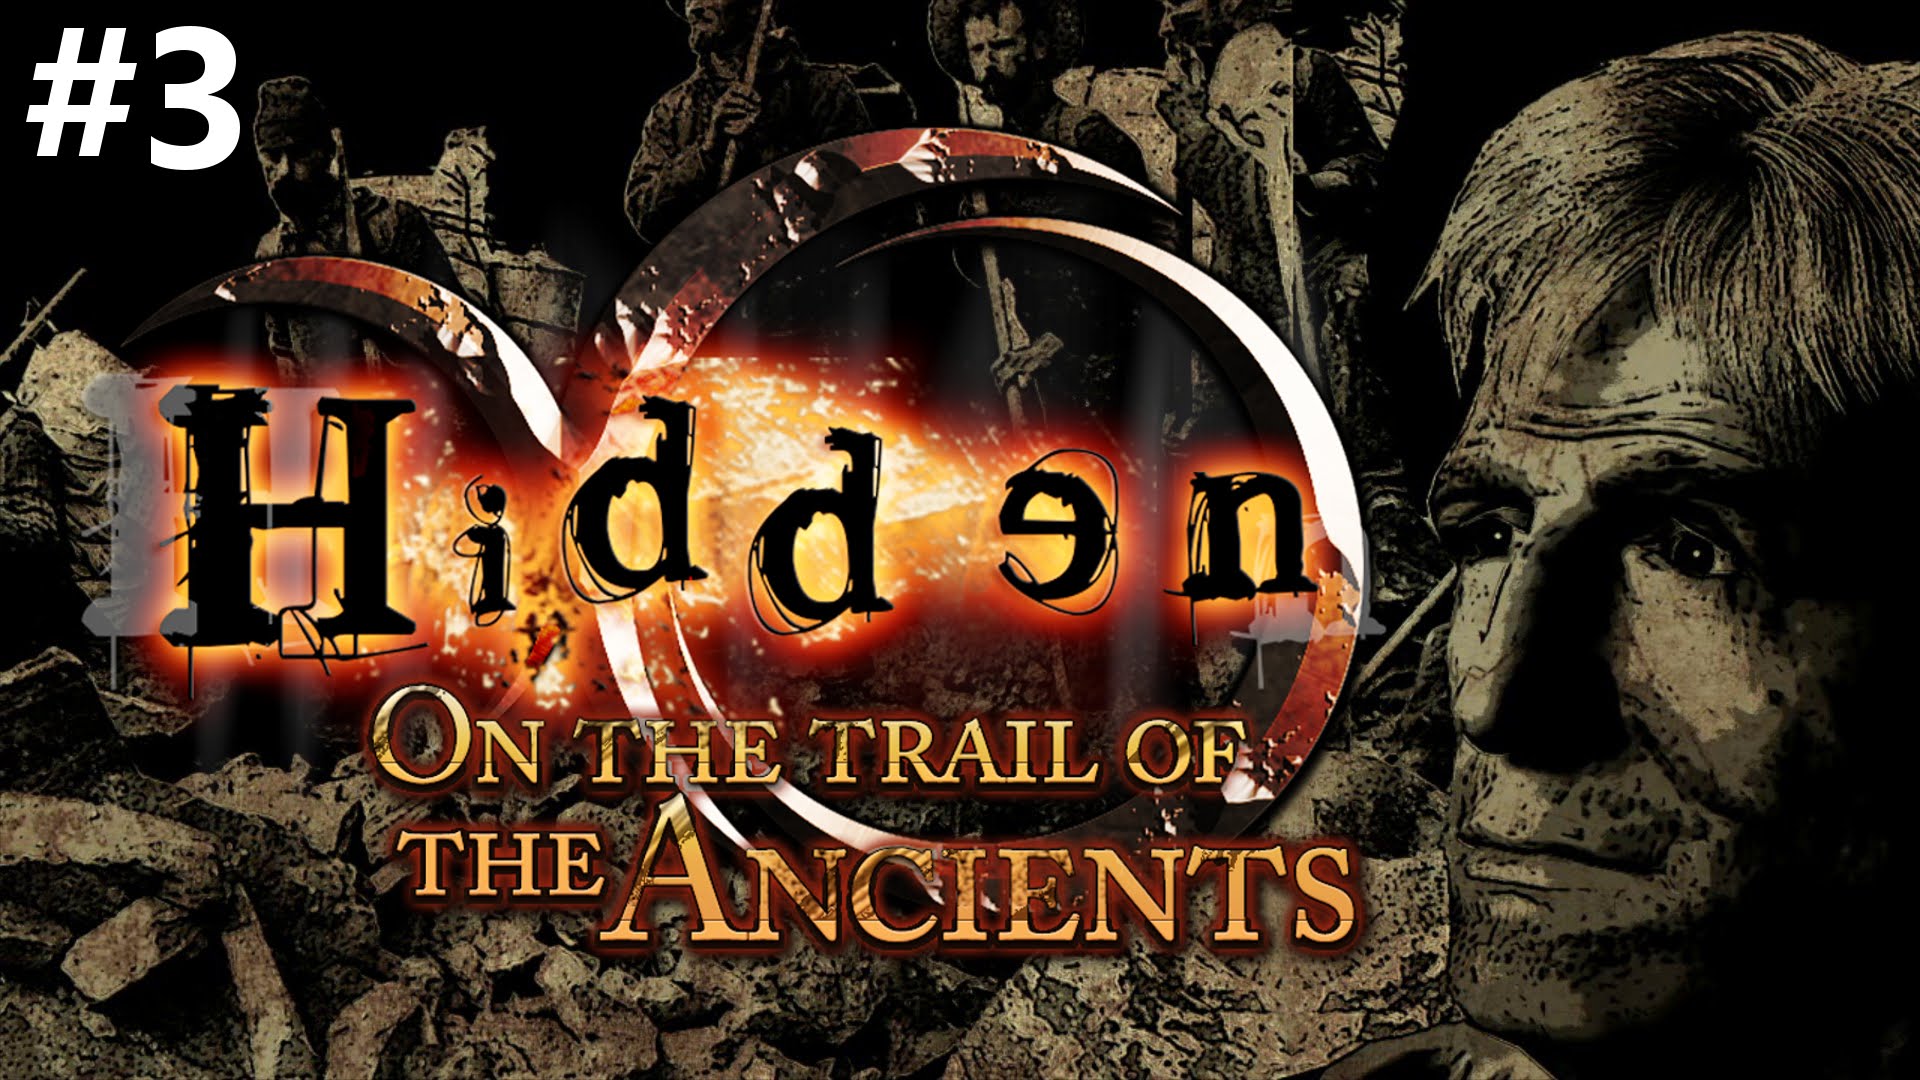 Hidden: On The Trail Of The Ancients High Quality Background on Wallpapers Vista